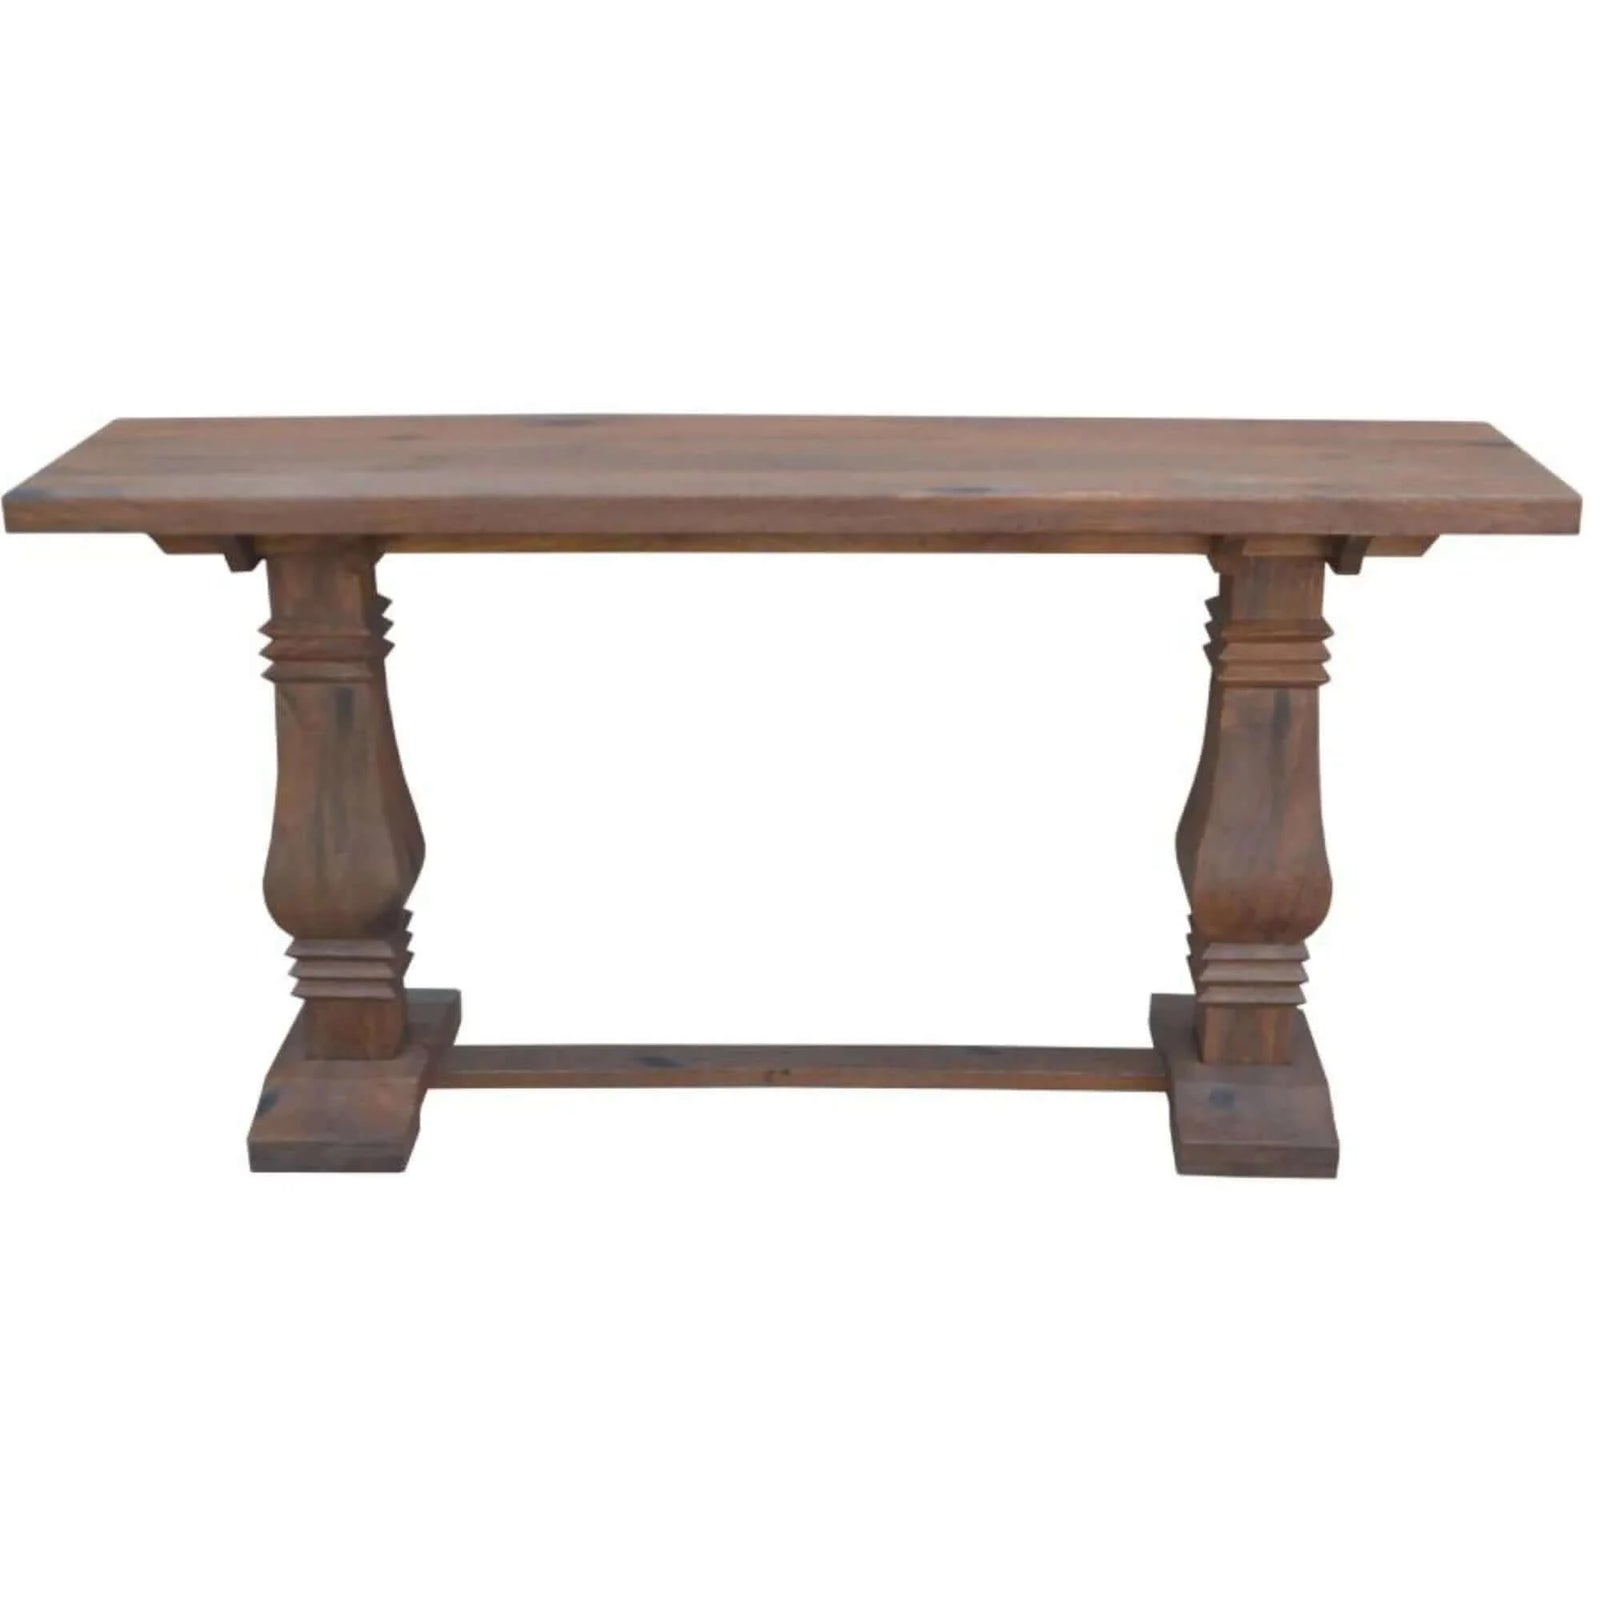 Buy florence console hall entrance table 160cm pedestal timber french provincial - upinteriors-Upinteriors